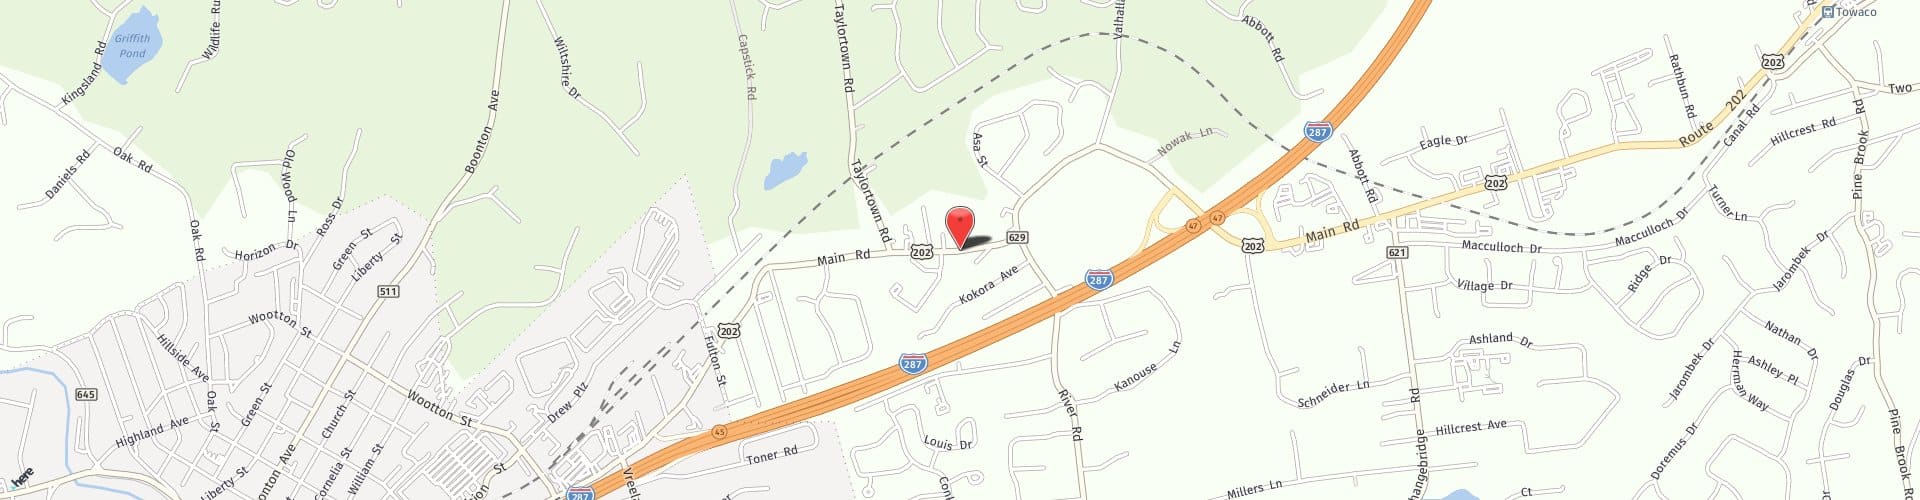 Location Map: 137 Main Road Montville, New Jersey 07045